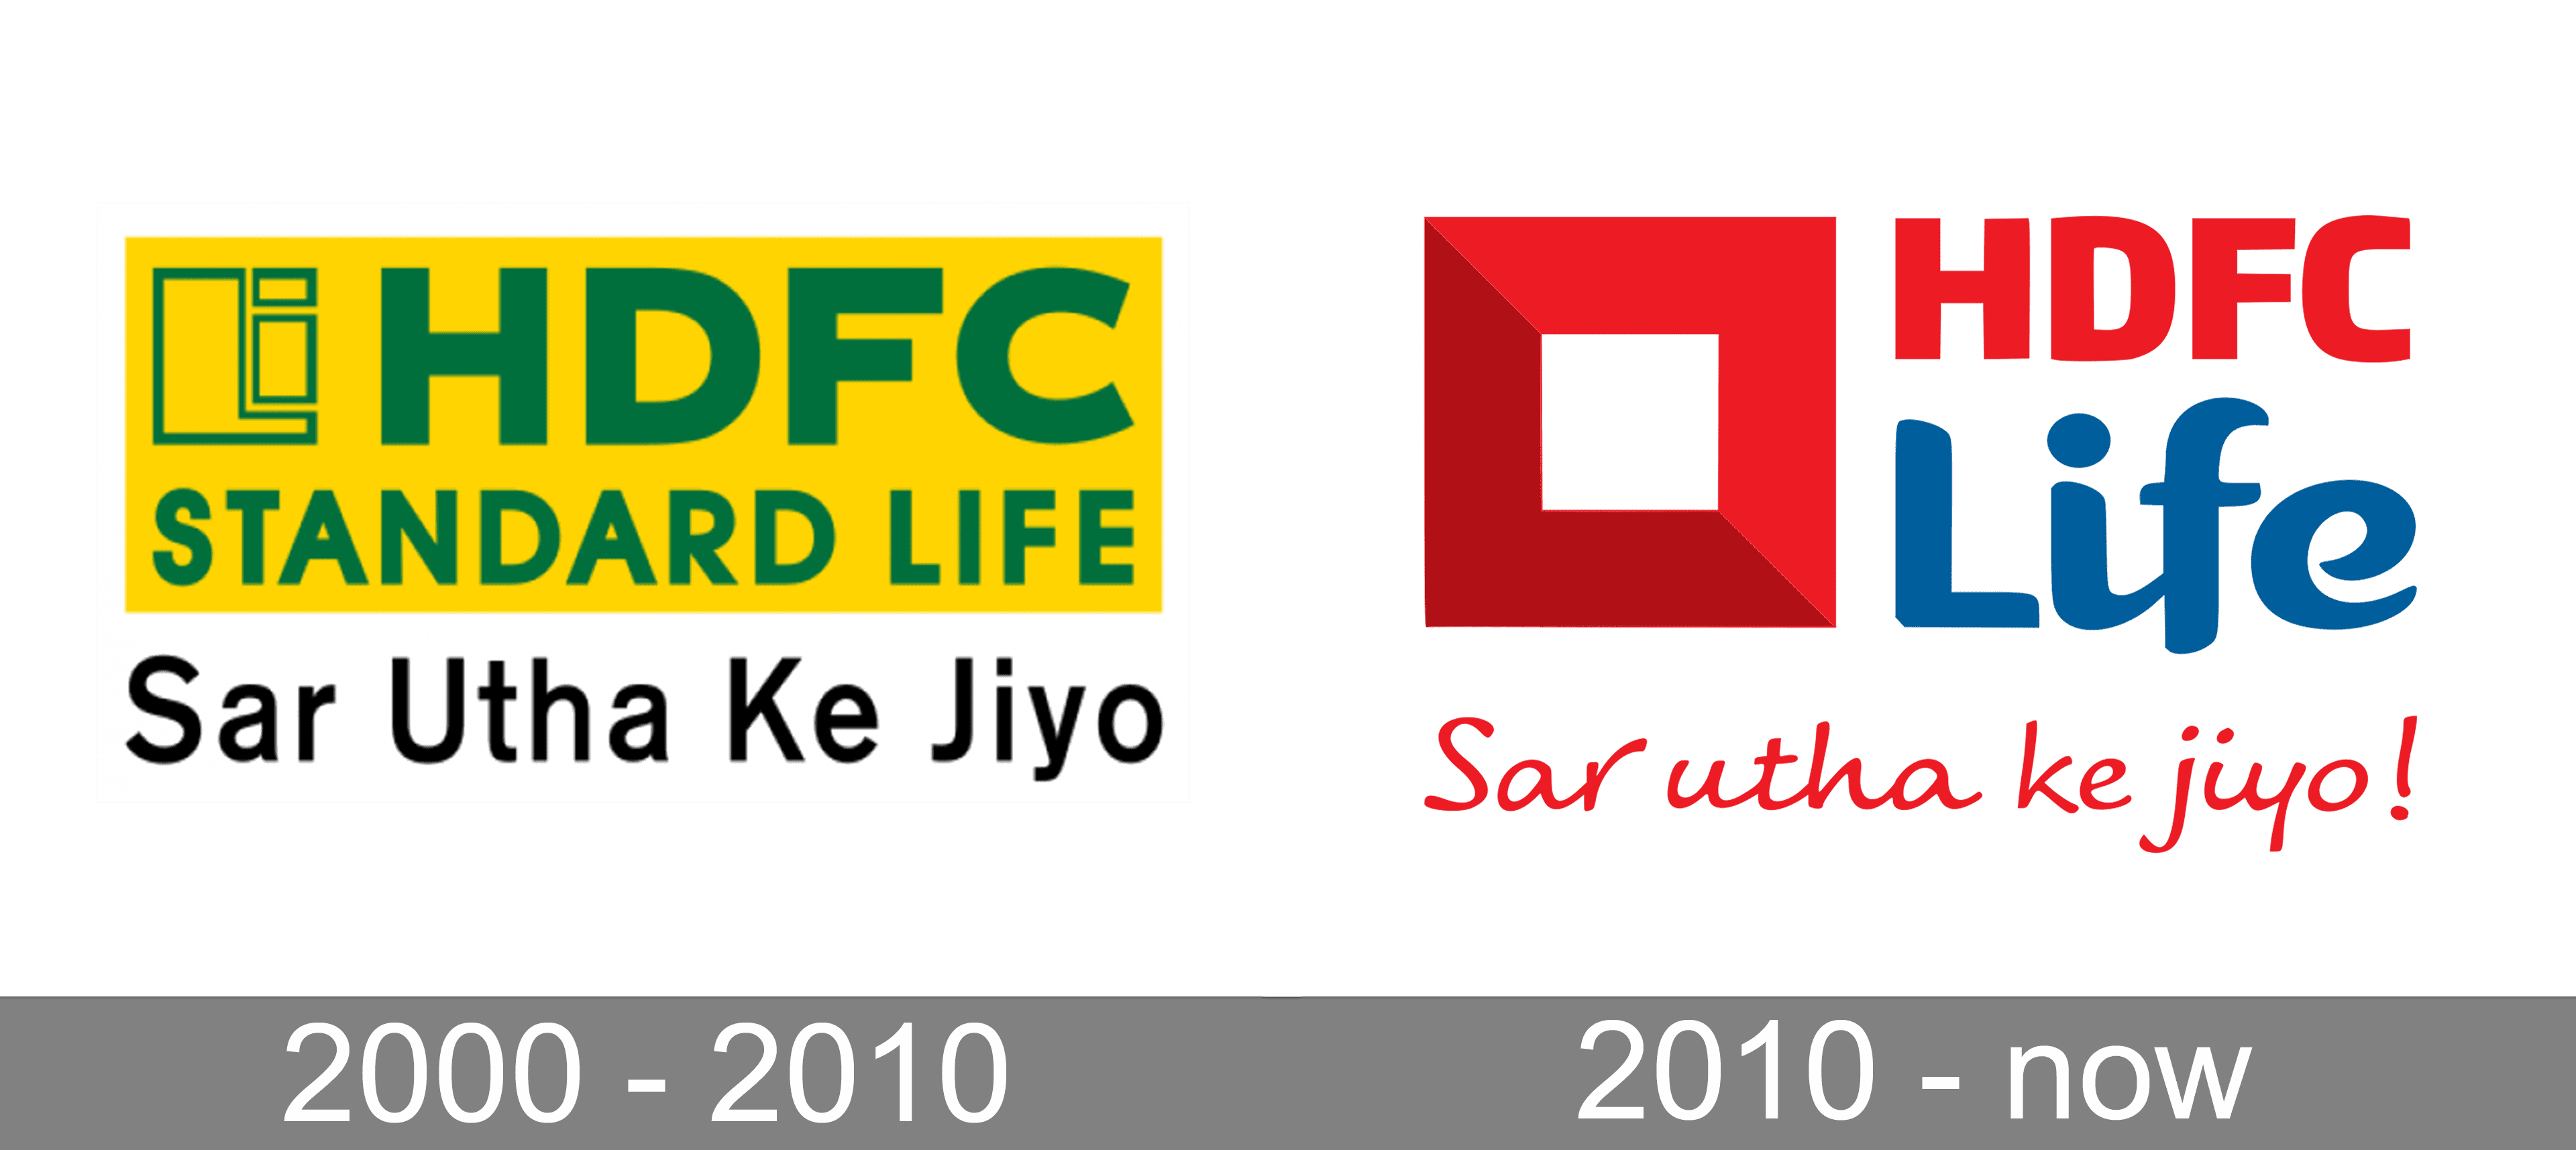 West Bangal, India - August 21, 2021 : HDFC Life Insurance Logo on Phone  Screen Stock Image. Editorial Photography - Image of concept, 2021:  232259287